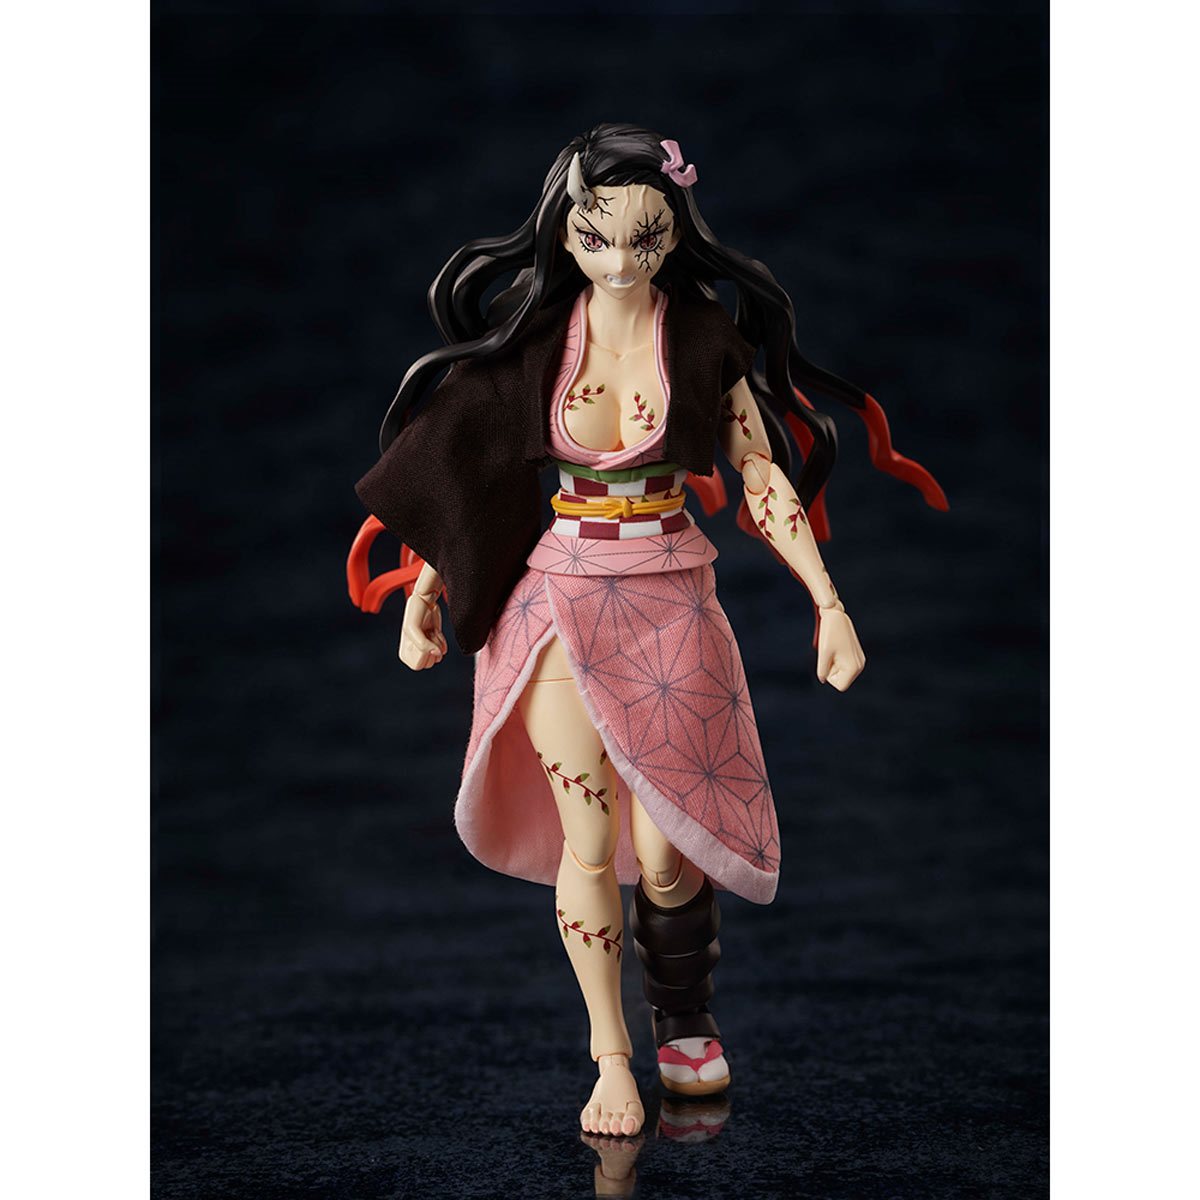 1:12 Scale Action Figure Women Clothes Fashionable Style Black for